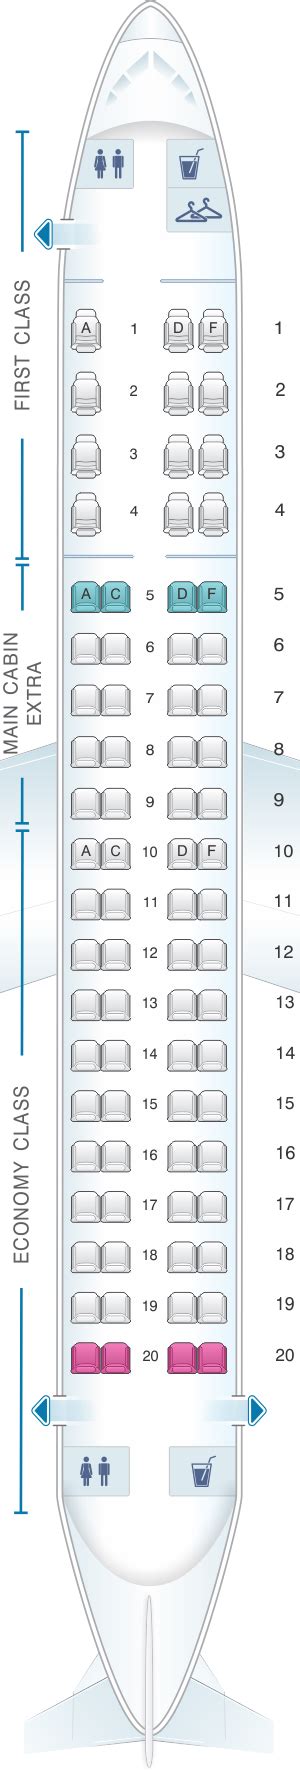 American airlines embraer 175 seat map. Seat Width: The distance between the inner sides of the armrests on a seat. Seat Recline: The distance between a seat back in its full upright and full recline position. View Embraer EMB 175 seating and specifications on United aircraft using this United Airlines seating chart. 